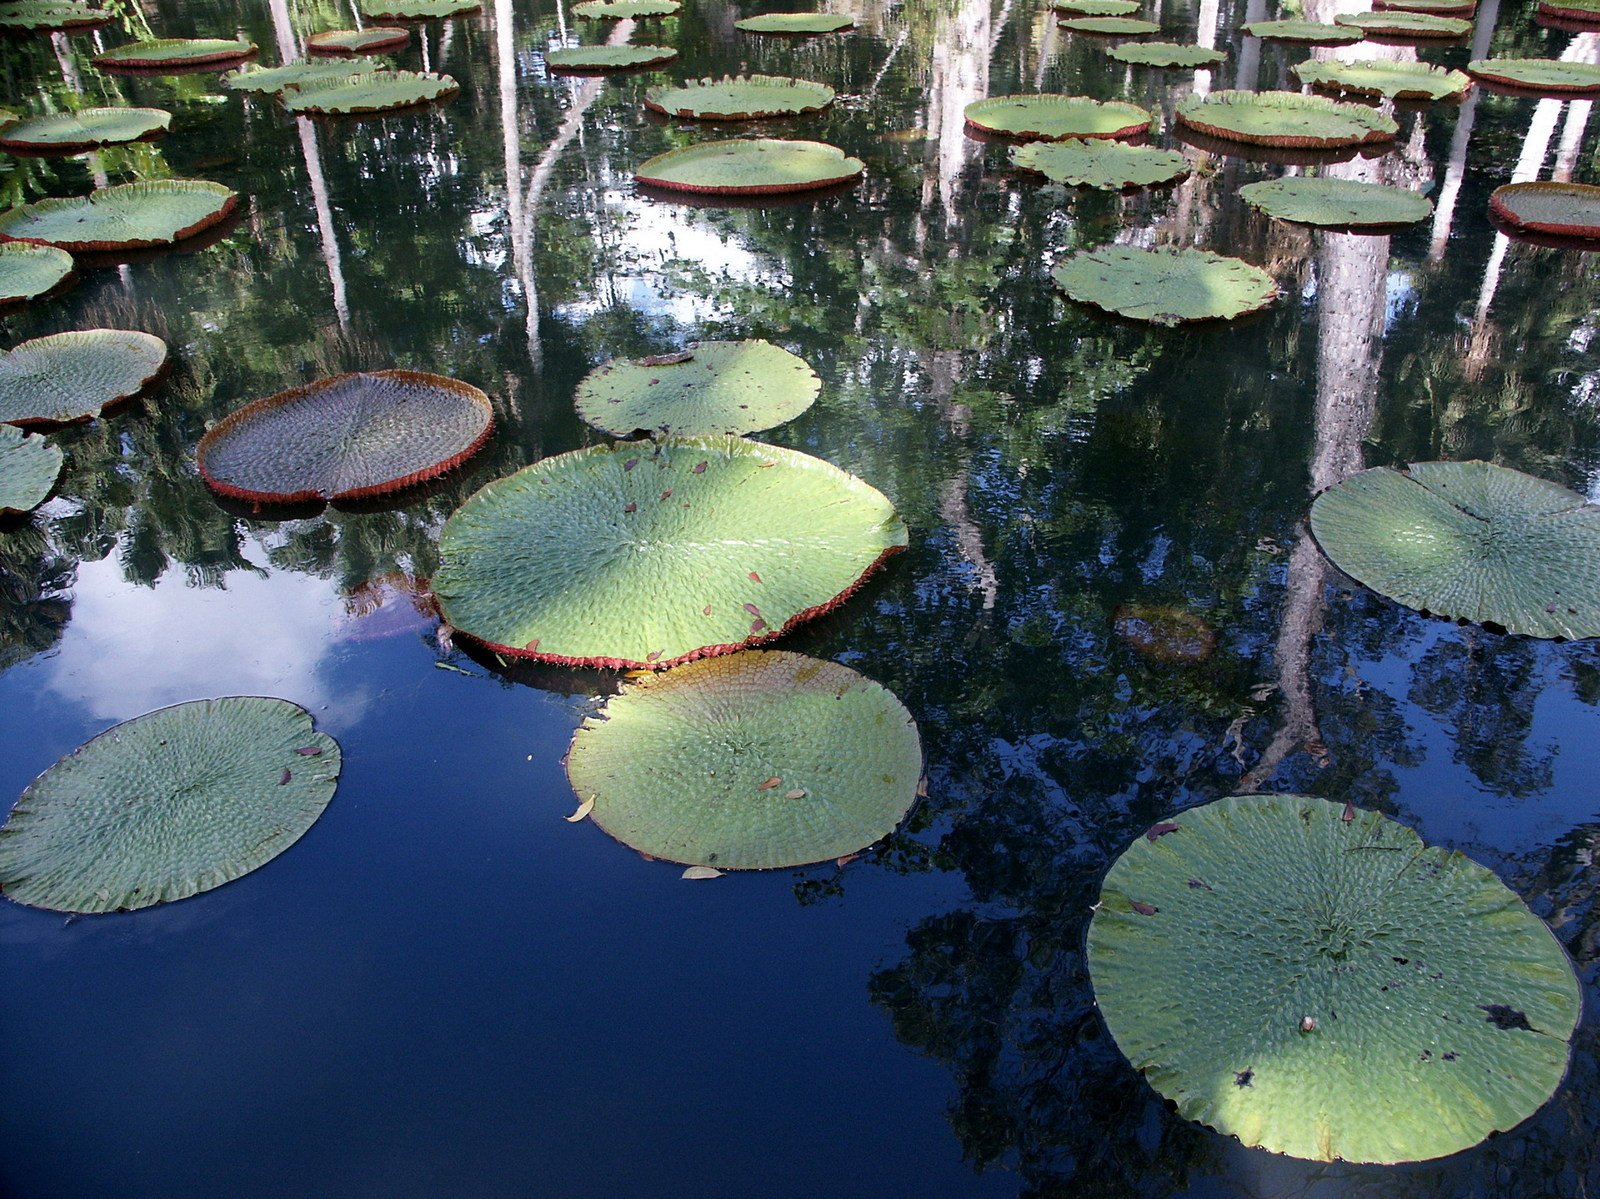 water lilies blooming on the water surface